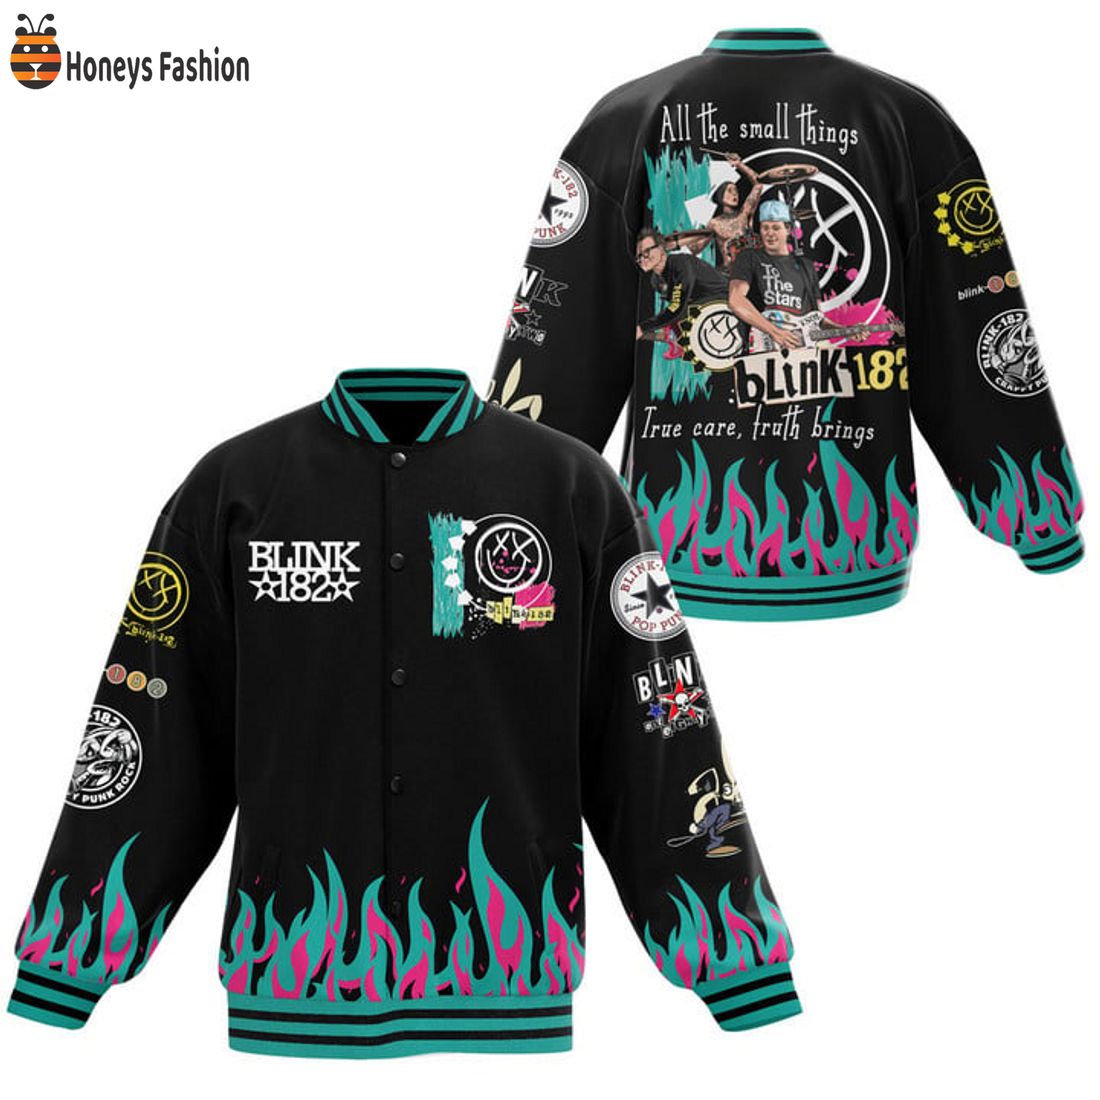 TRENDING Blink 182 All The Small Things True Care Truth Brings Baseball Jacket